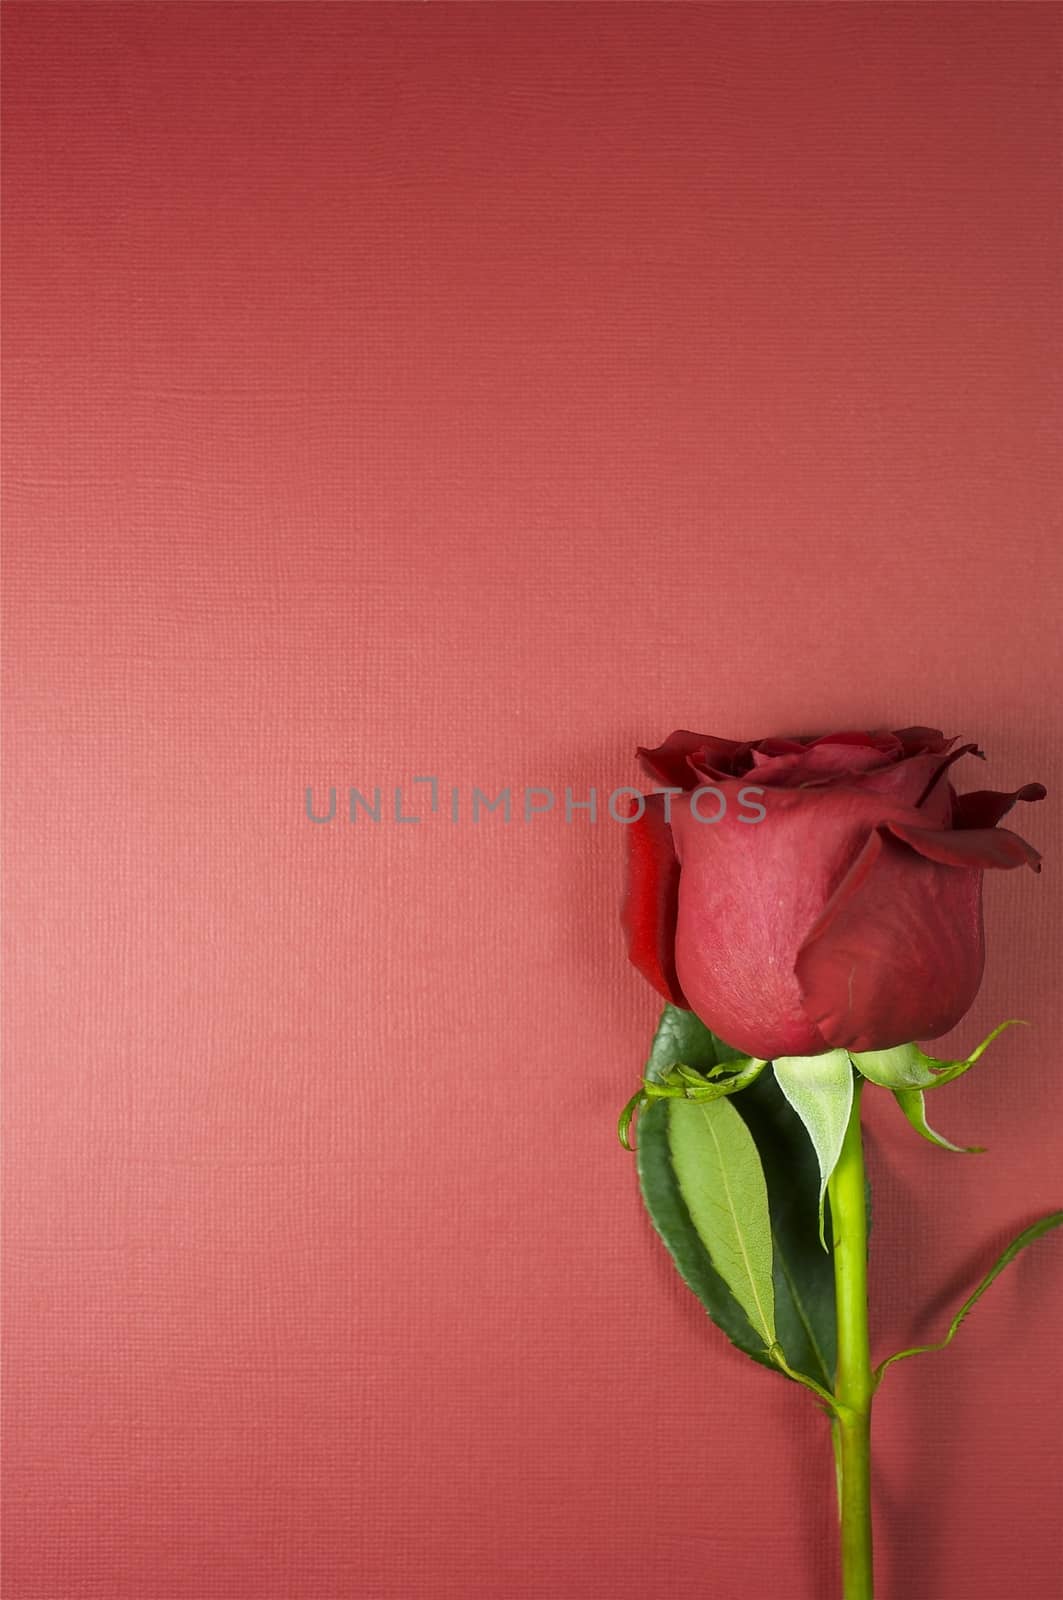 Red Rose on the Textured Red-Burgundy Background. Special Occasion Copy Space.